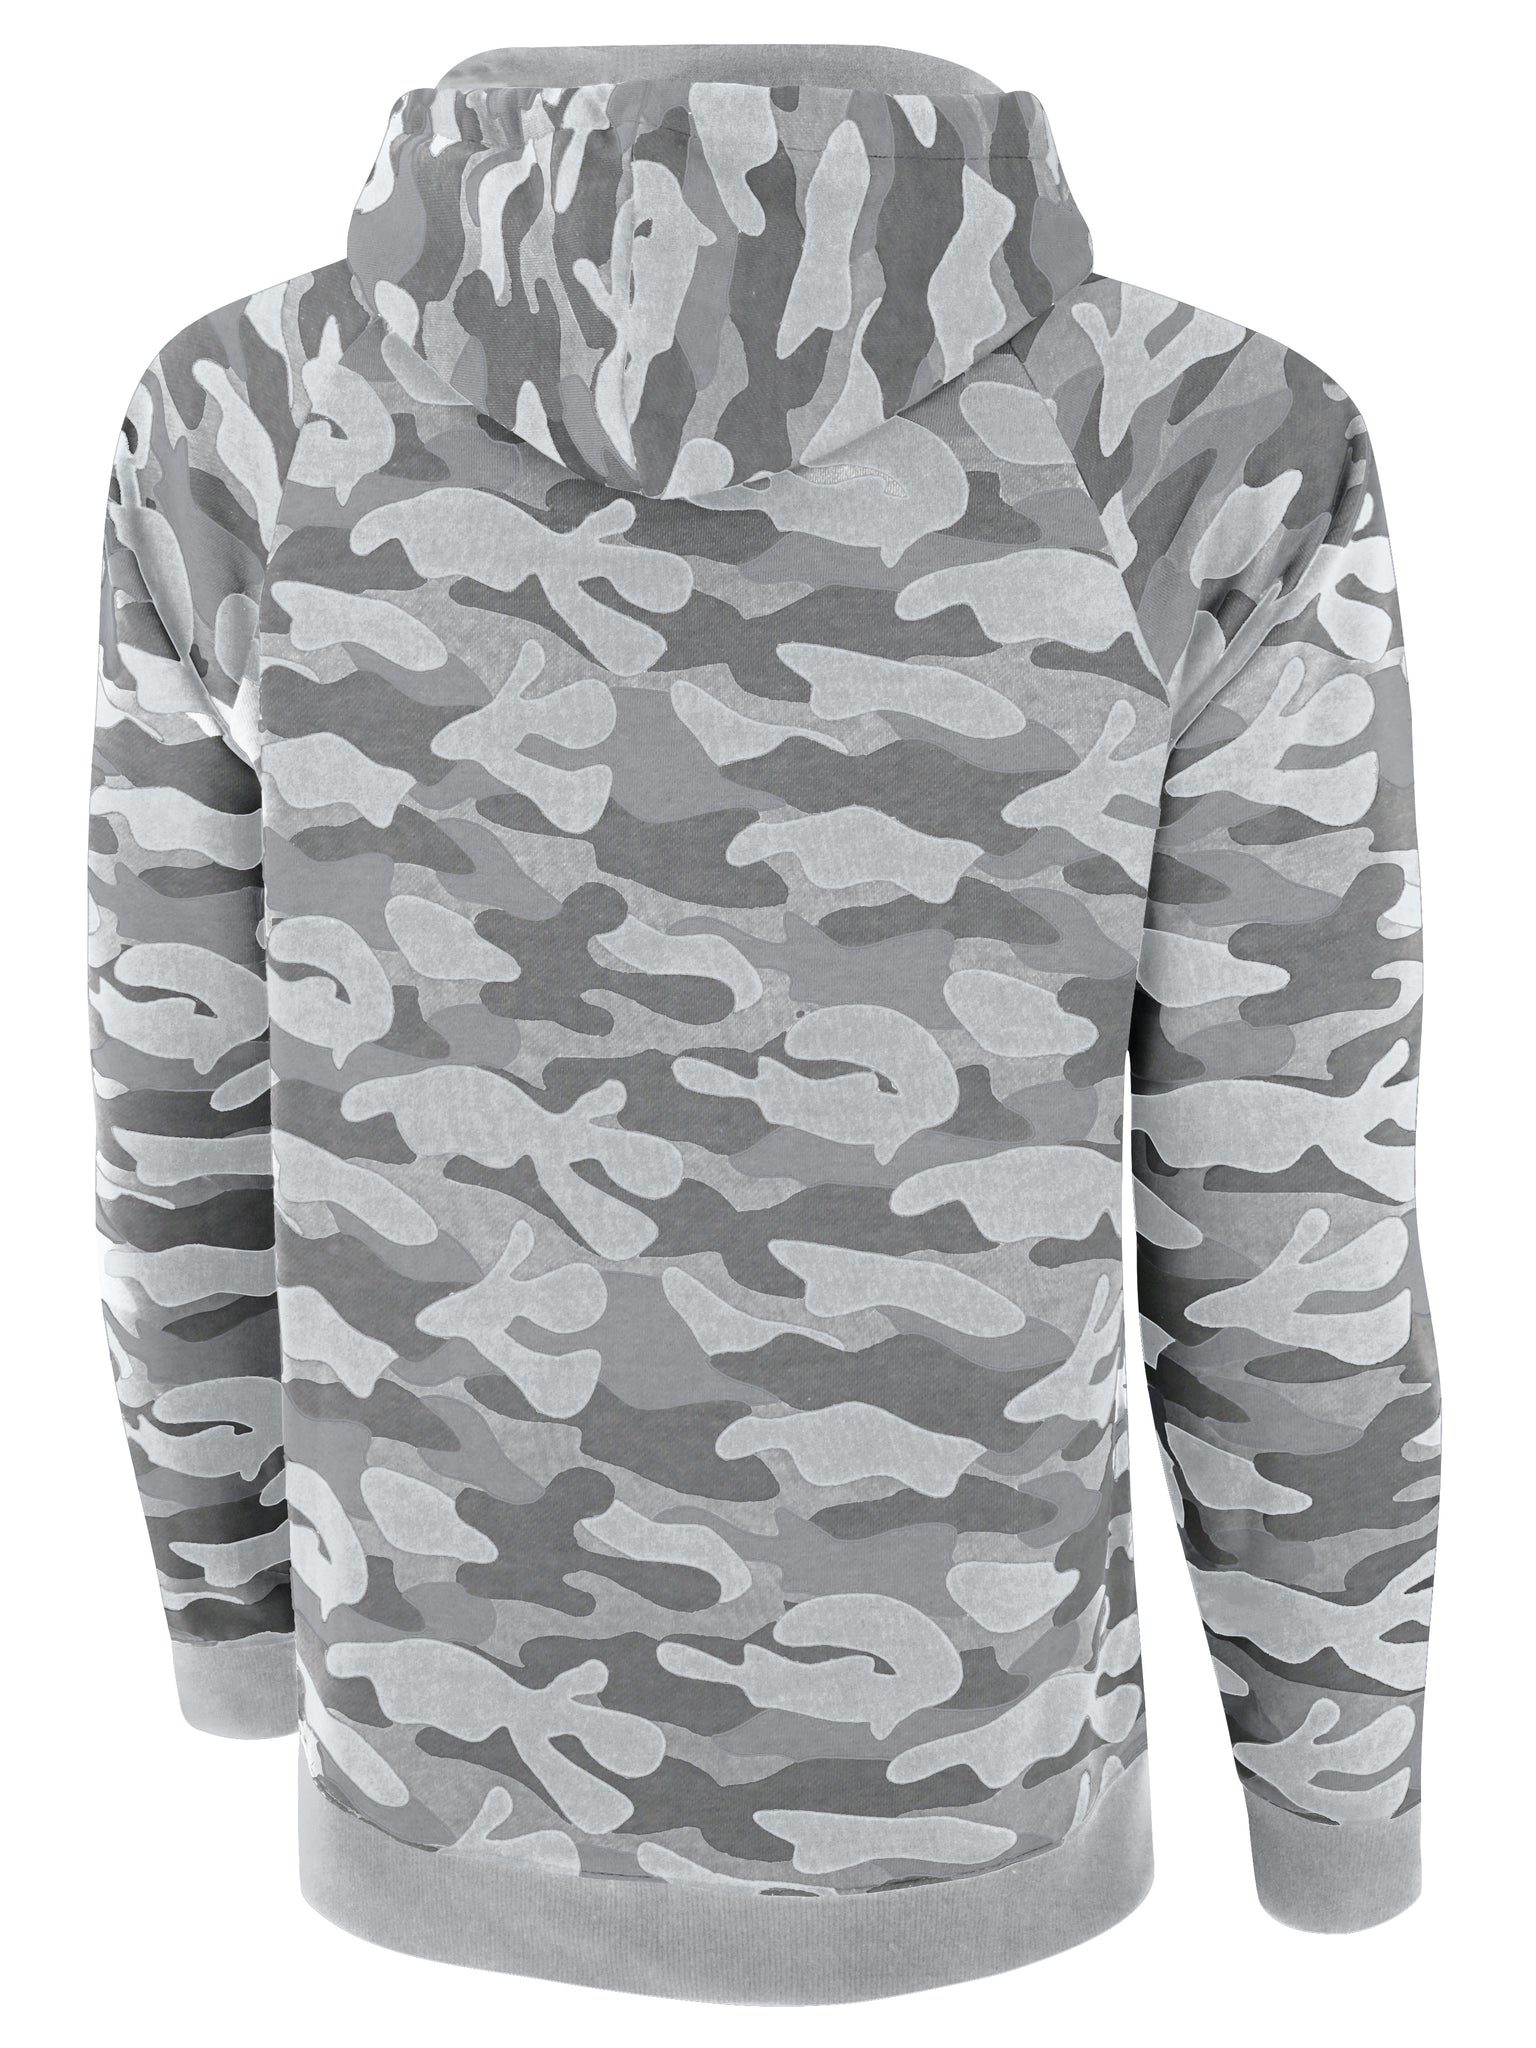 Lifestyle French Terry Camo Print Hoodie AGA-3455HP-FT